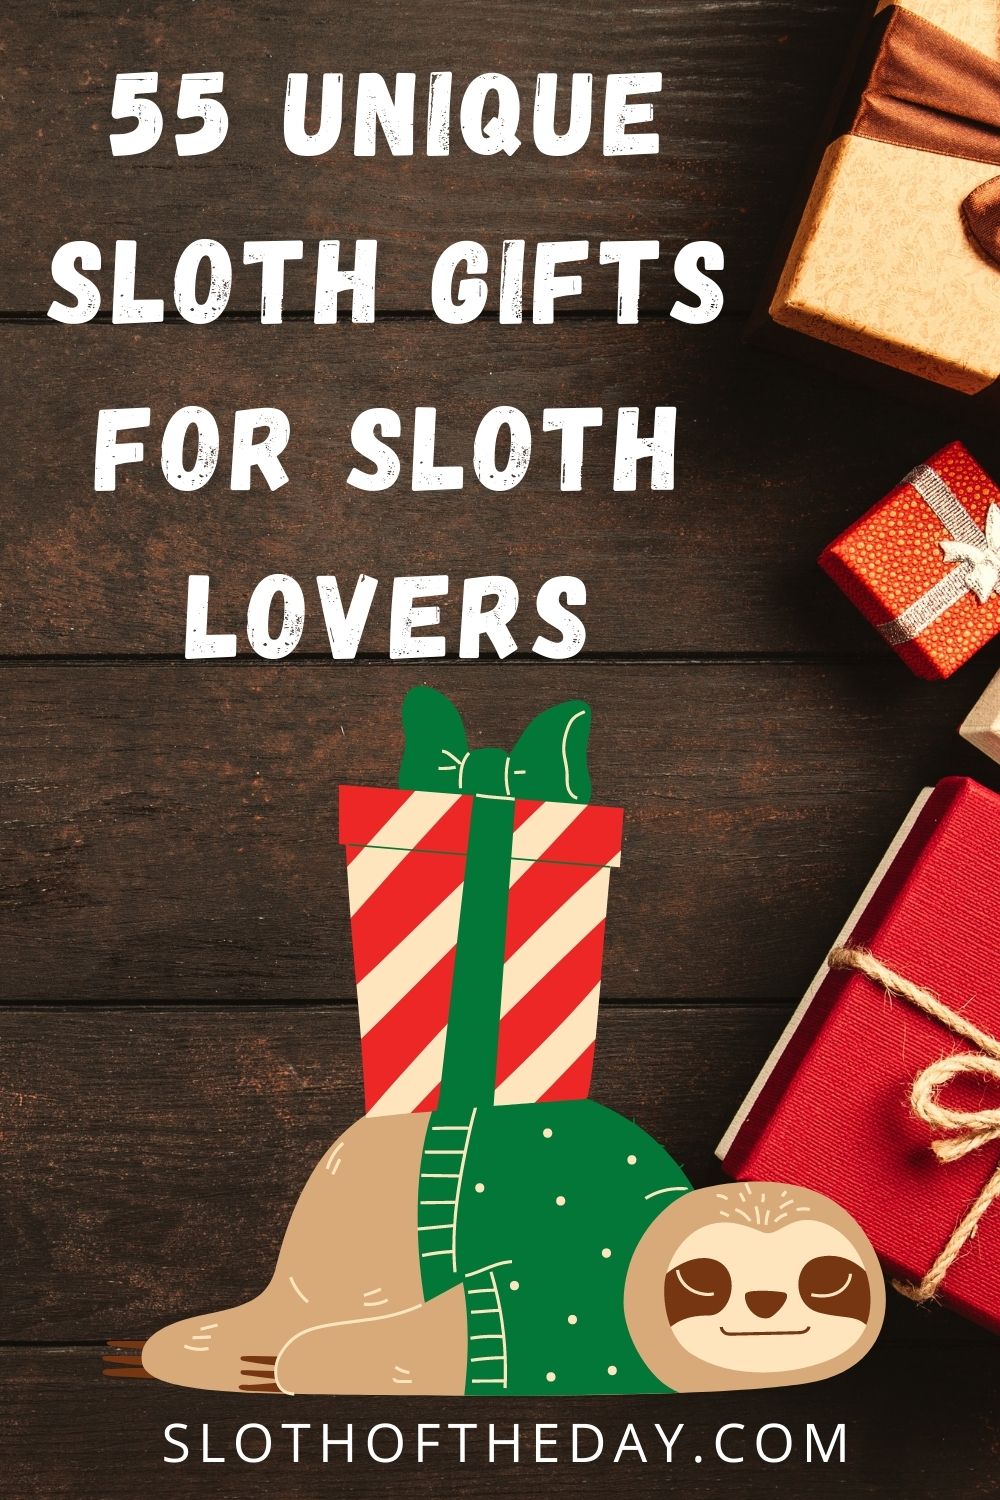 Sloth Gifts For Sloth Lovers 55+ Unique Sloth Gifts